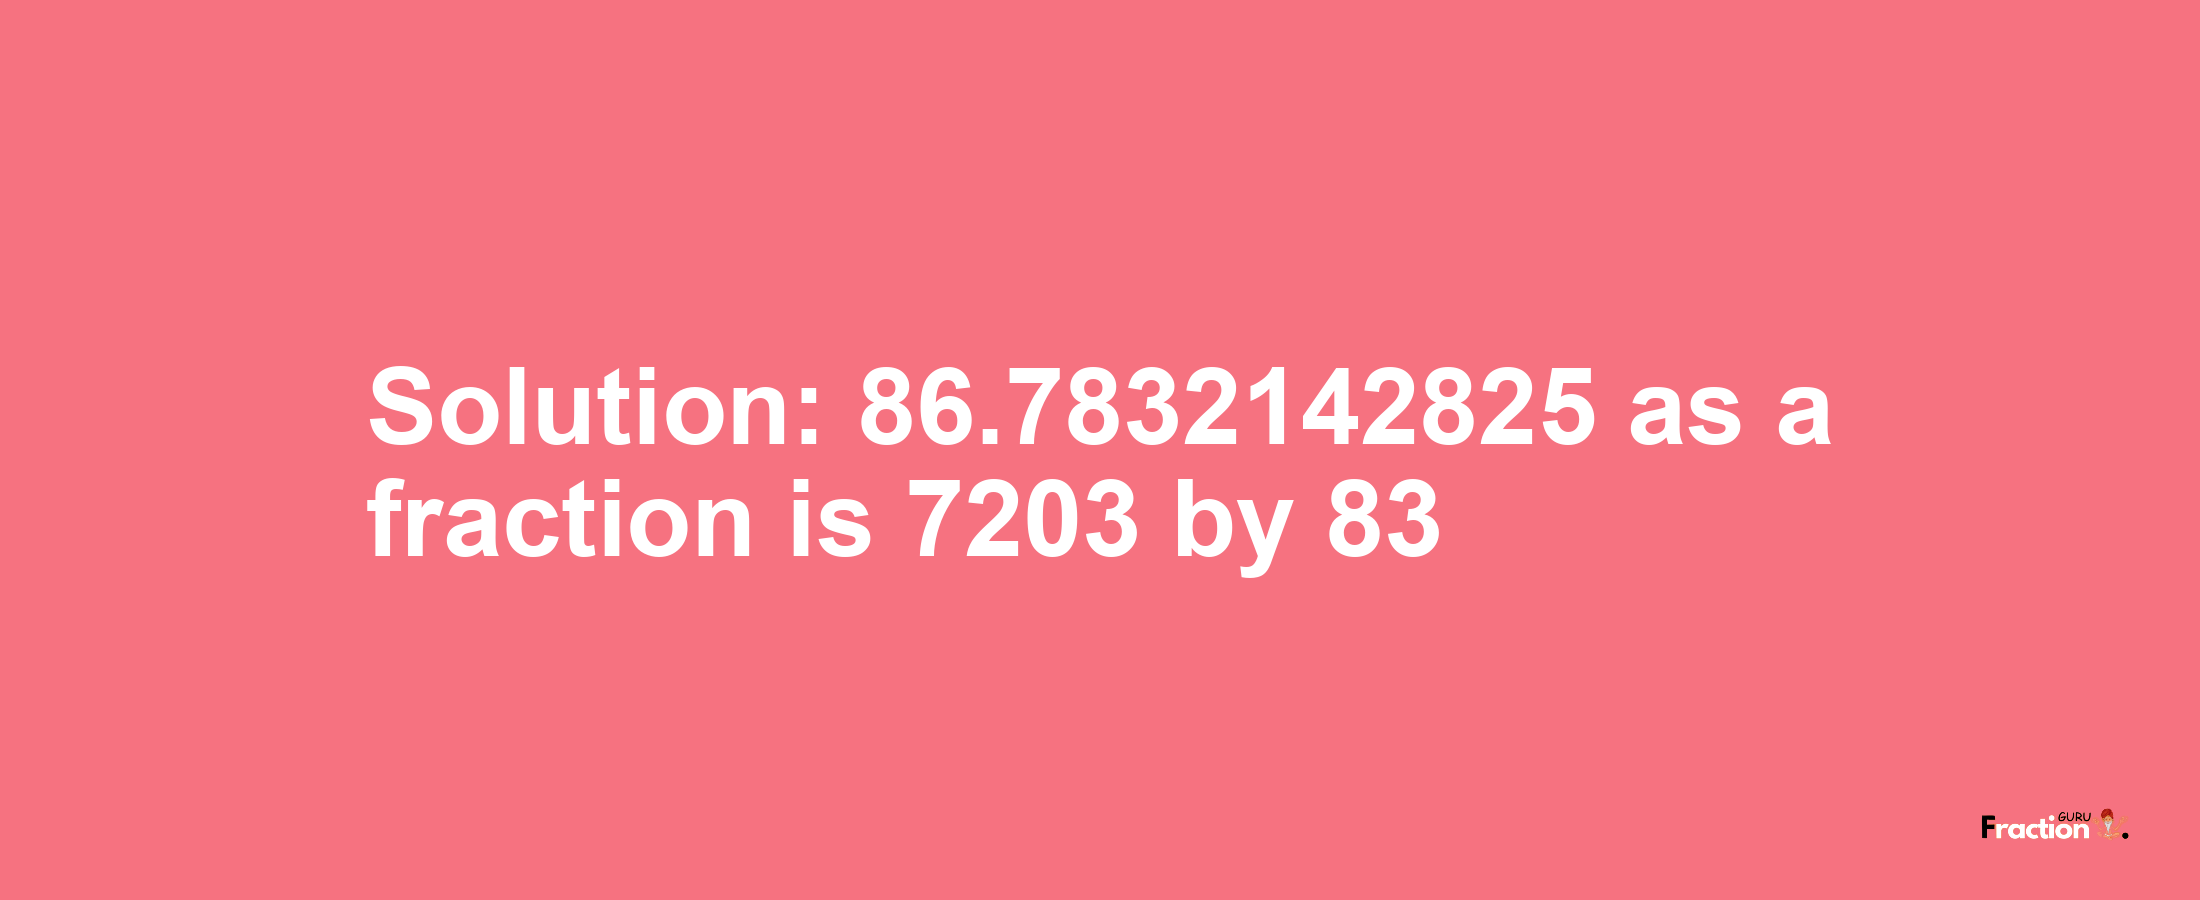 Solution:86.7832142825 as a fraction is 7203/83